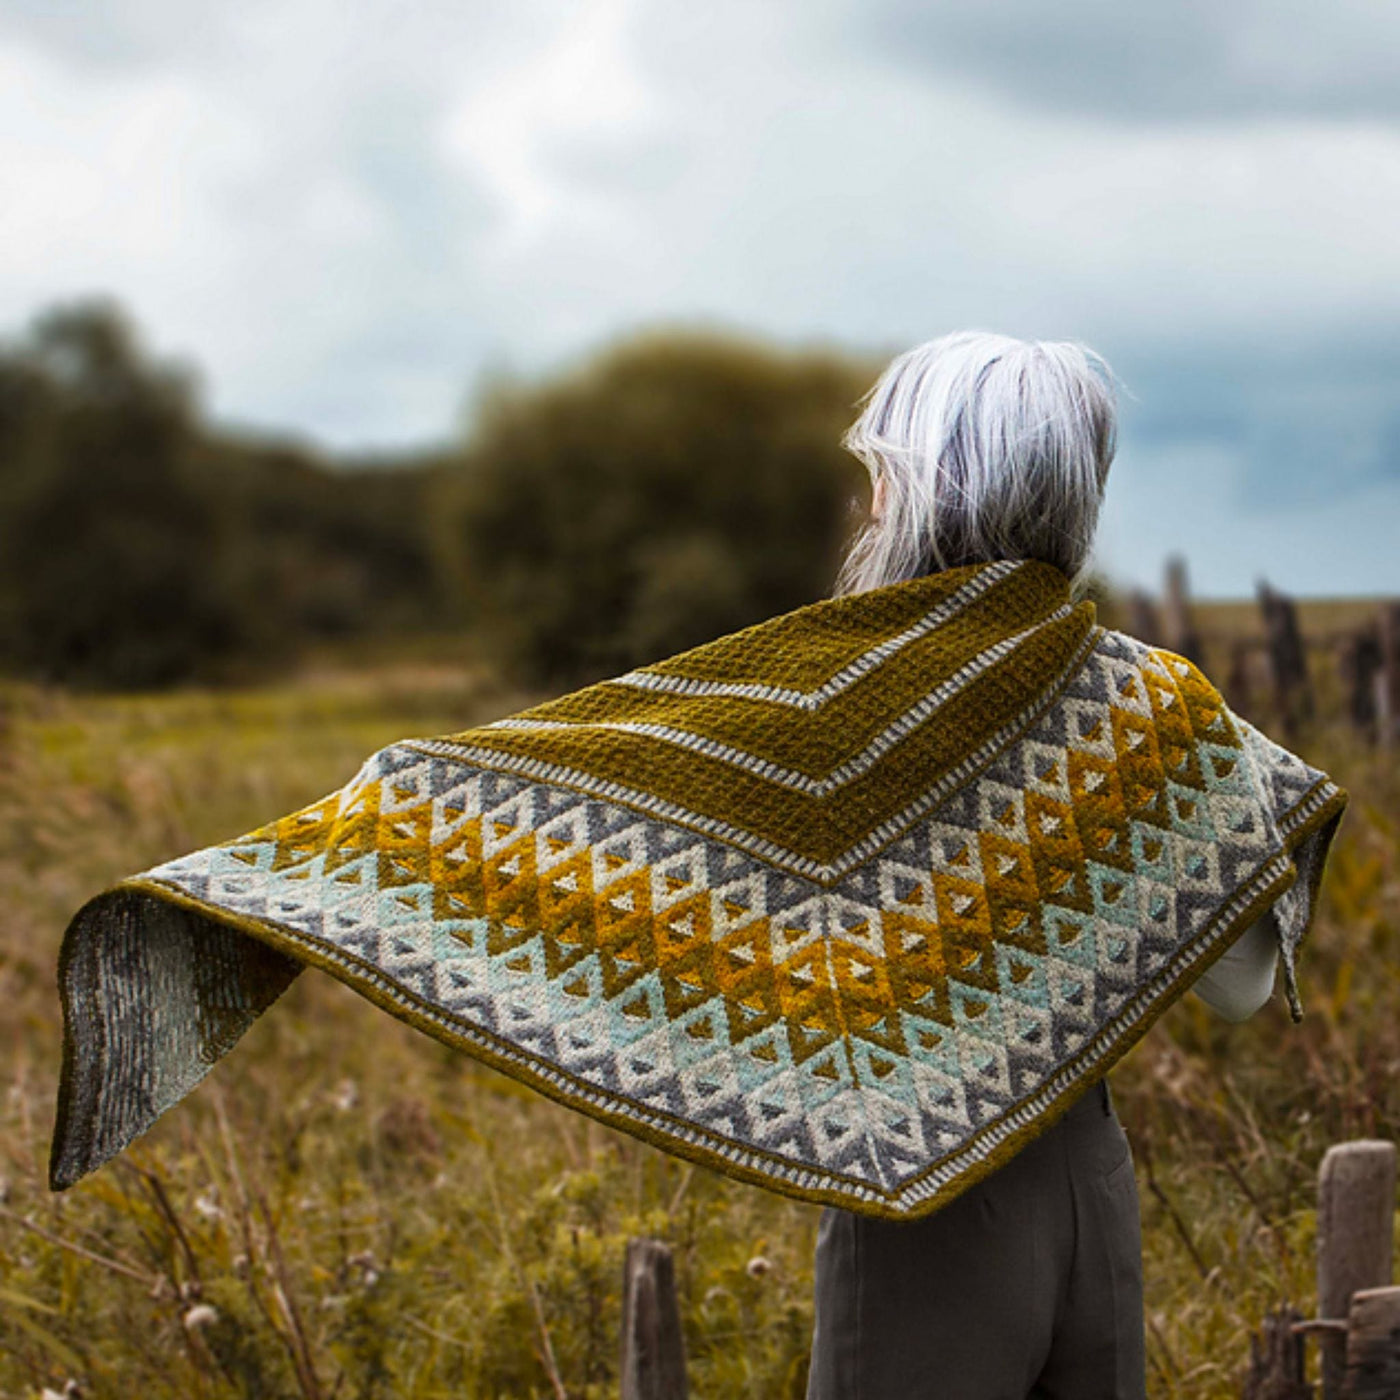 Artus Shawl by Natasja Hornby in Rustic Heather Sport